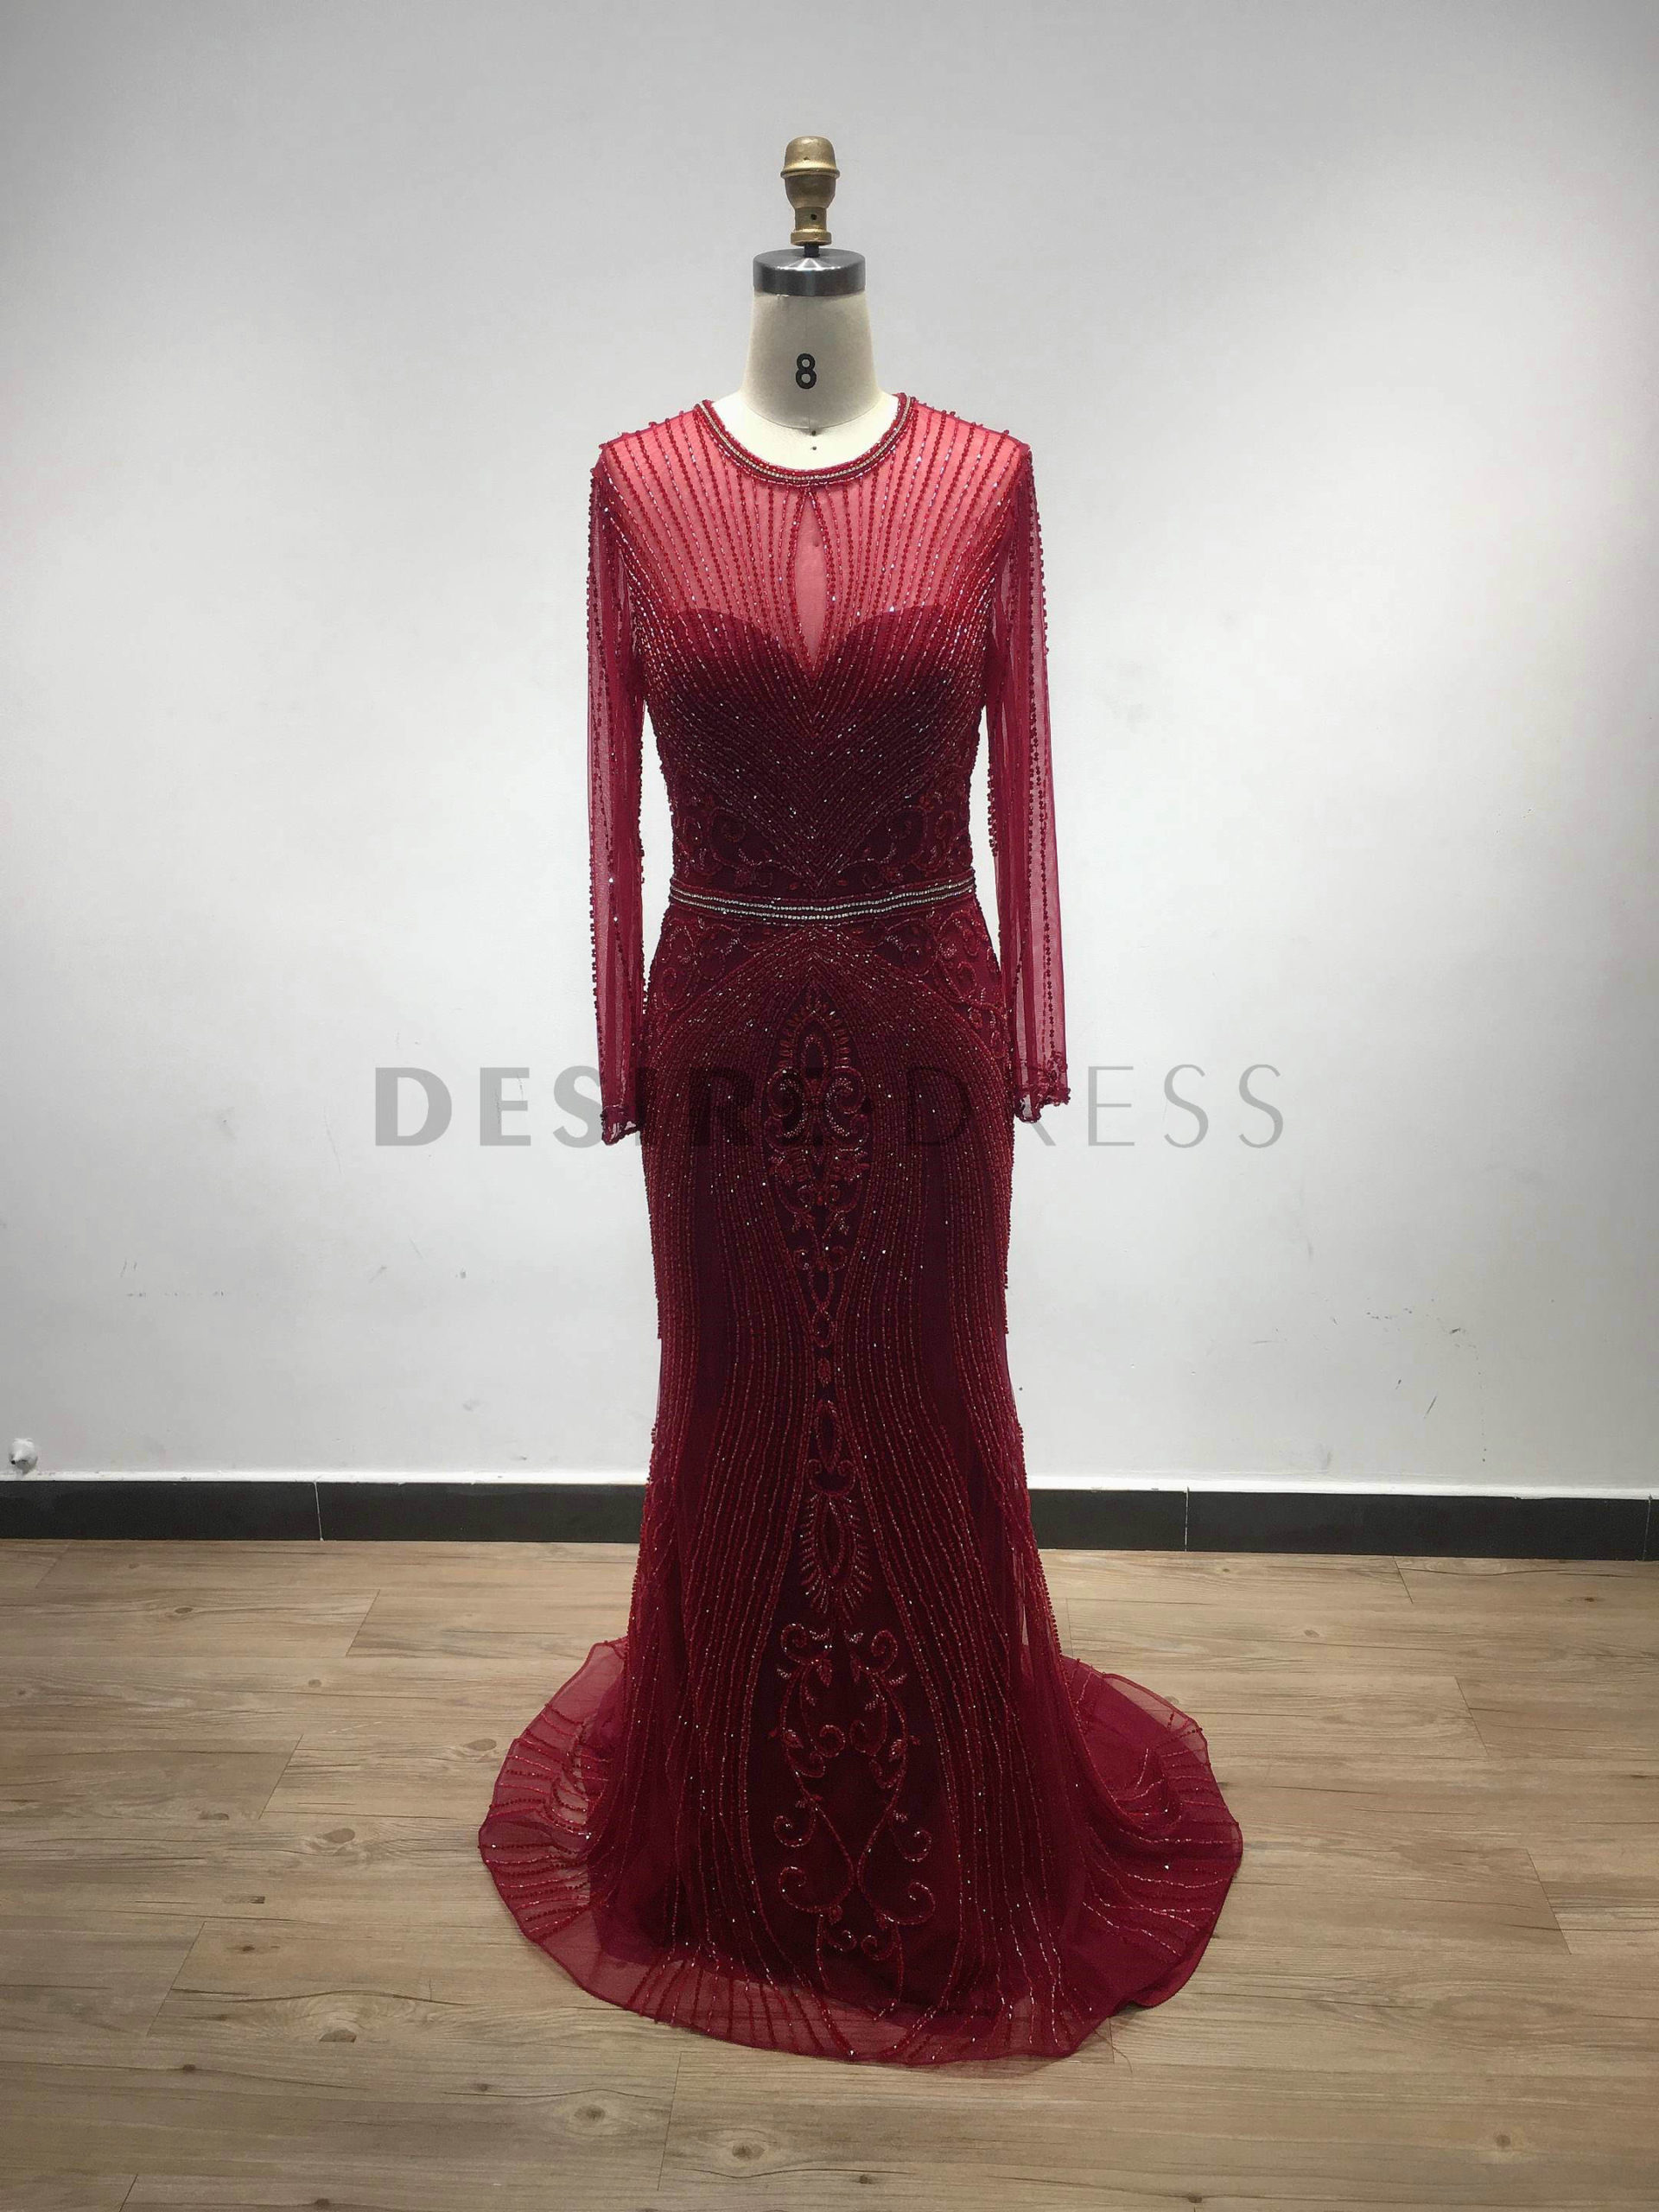 Best-Selling-Key-Hole-Long-Sleeve-Bodice-Couture-Evening-Dresses-DKN1950B-3